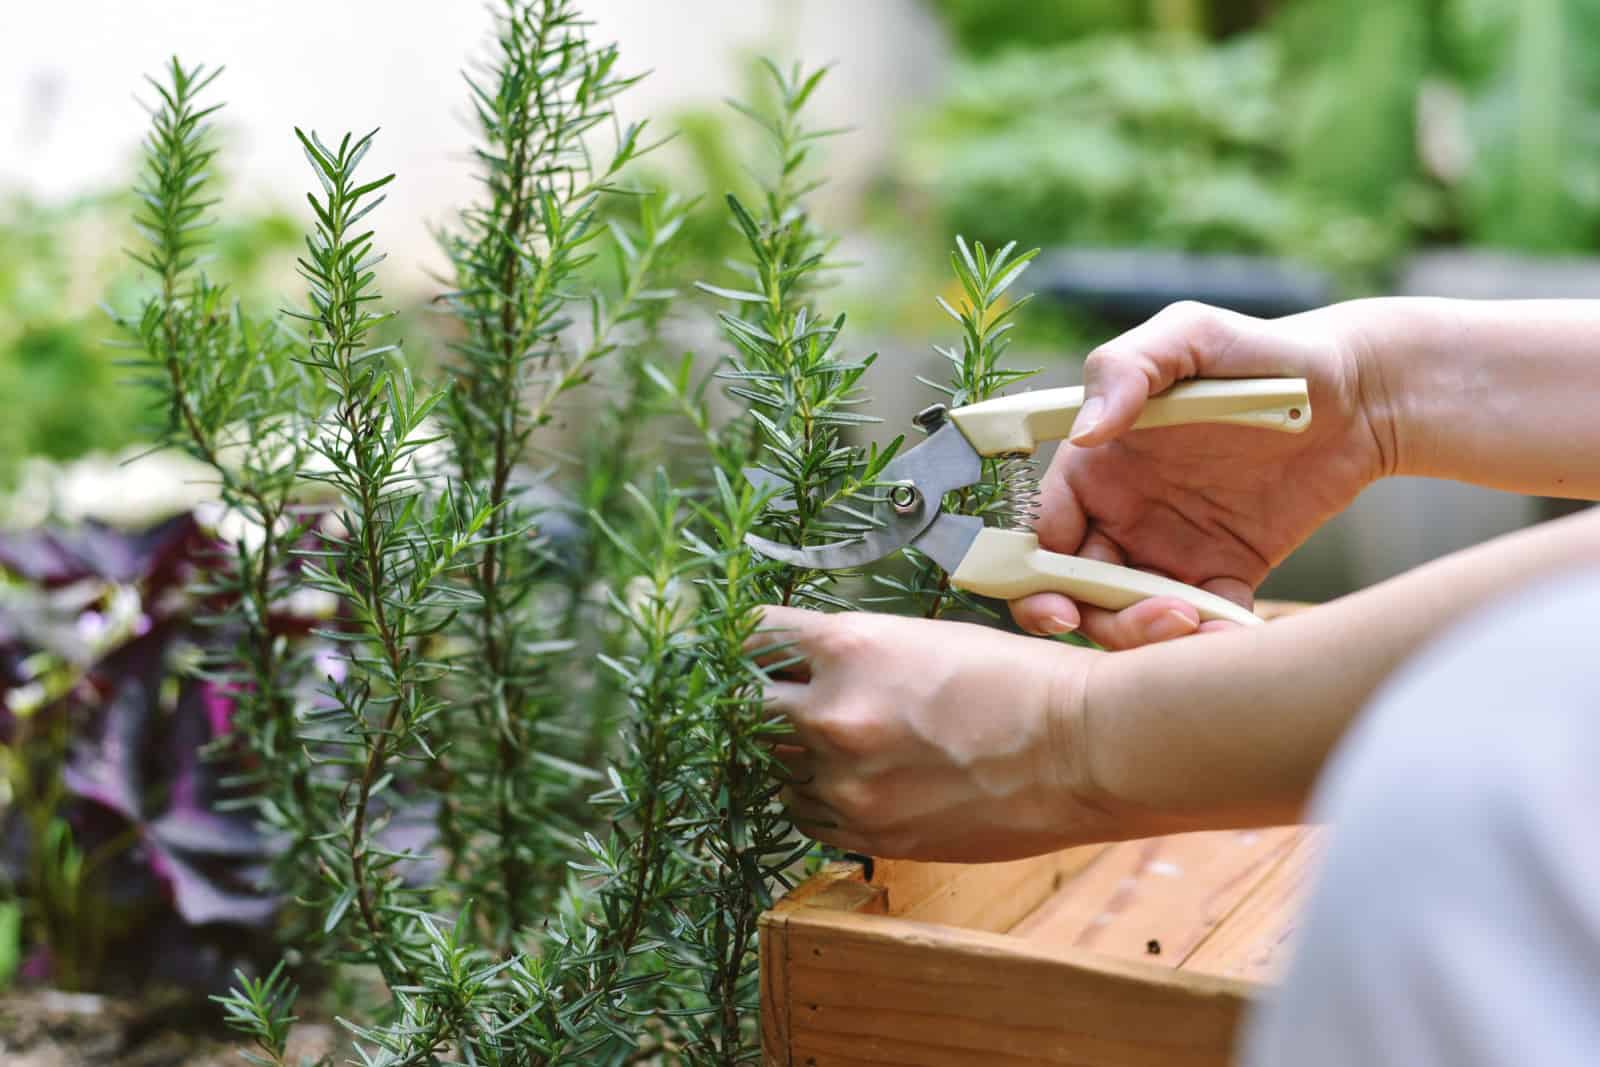 Woman cutting rosemary herb branches by scissors,